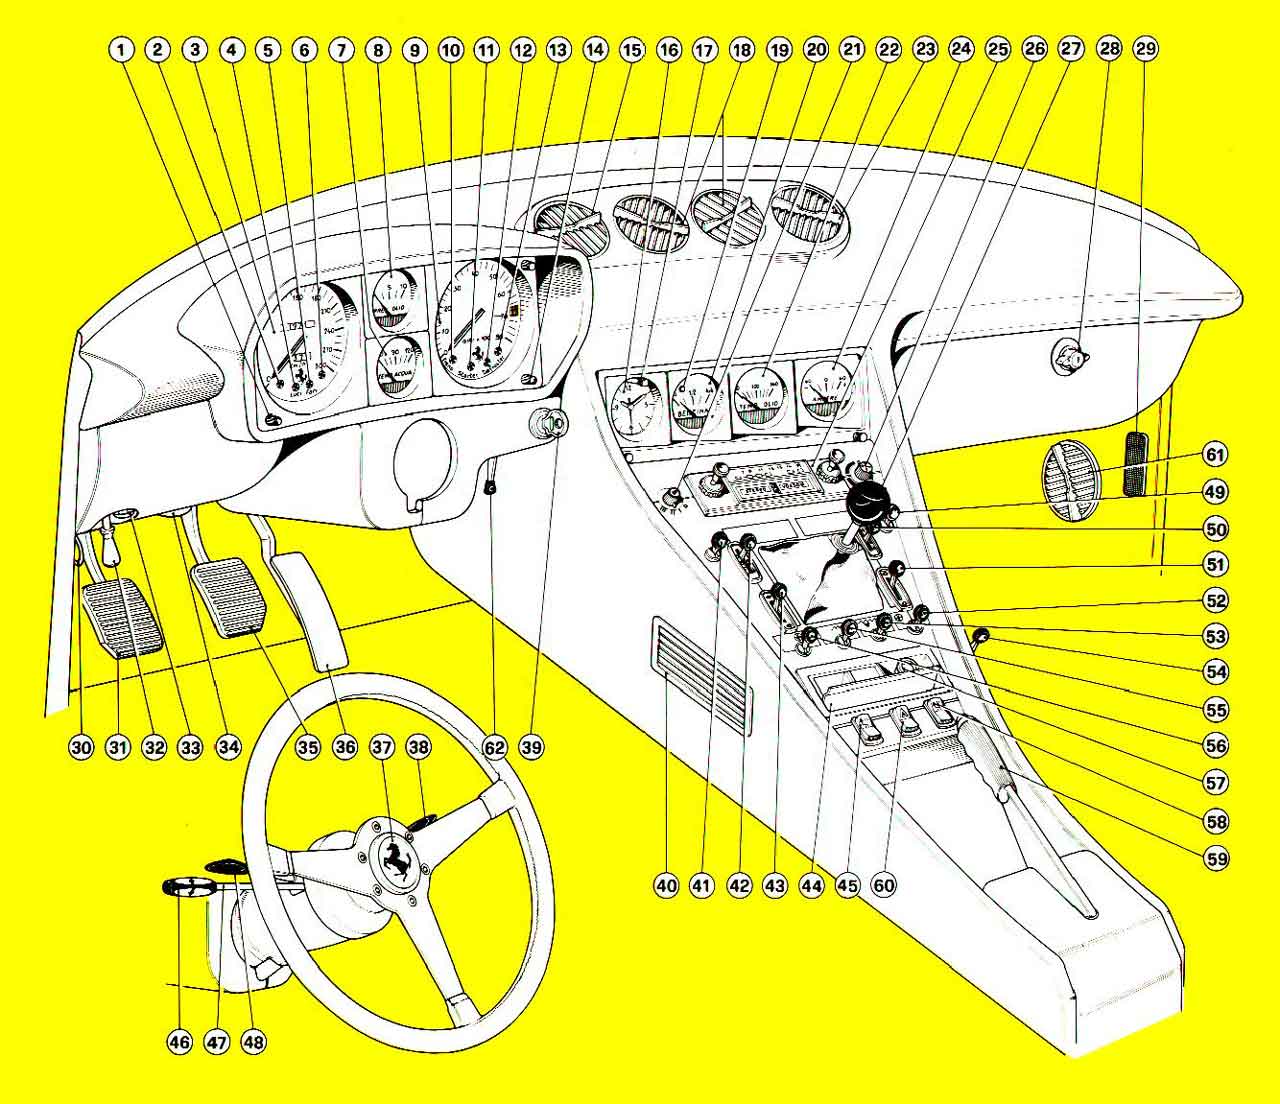 Controls from Owner's Manual 54/71